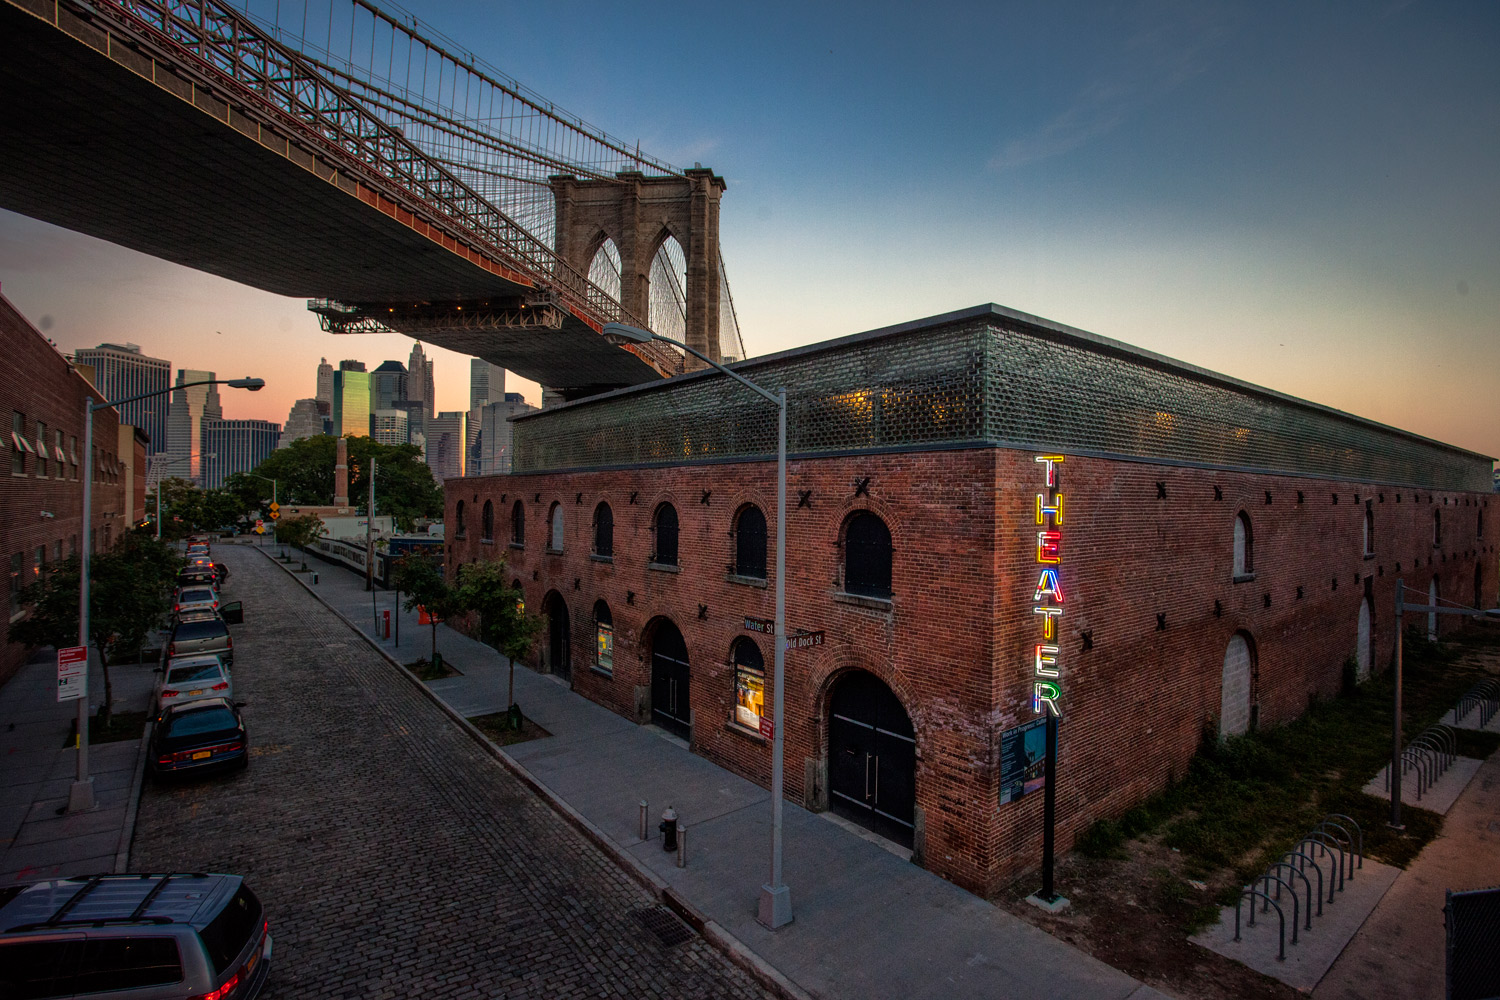 St. Ann's Warehouse at the former tobacco warehouse. Photo courtesy St. Ann's Warehouse <a href="http://ny.curbed.com/archives/2015/10/06/st_anns_reveals_new_theater_at_dumbos_tobacco_warehouse.php">via Curbed NY</a>